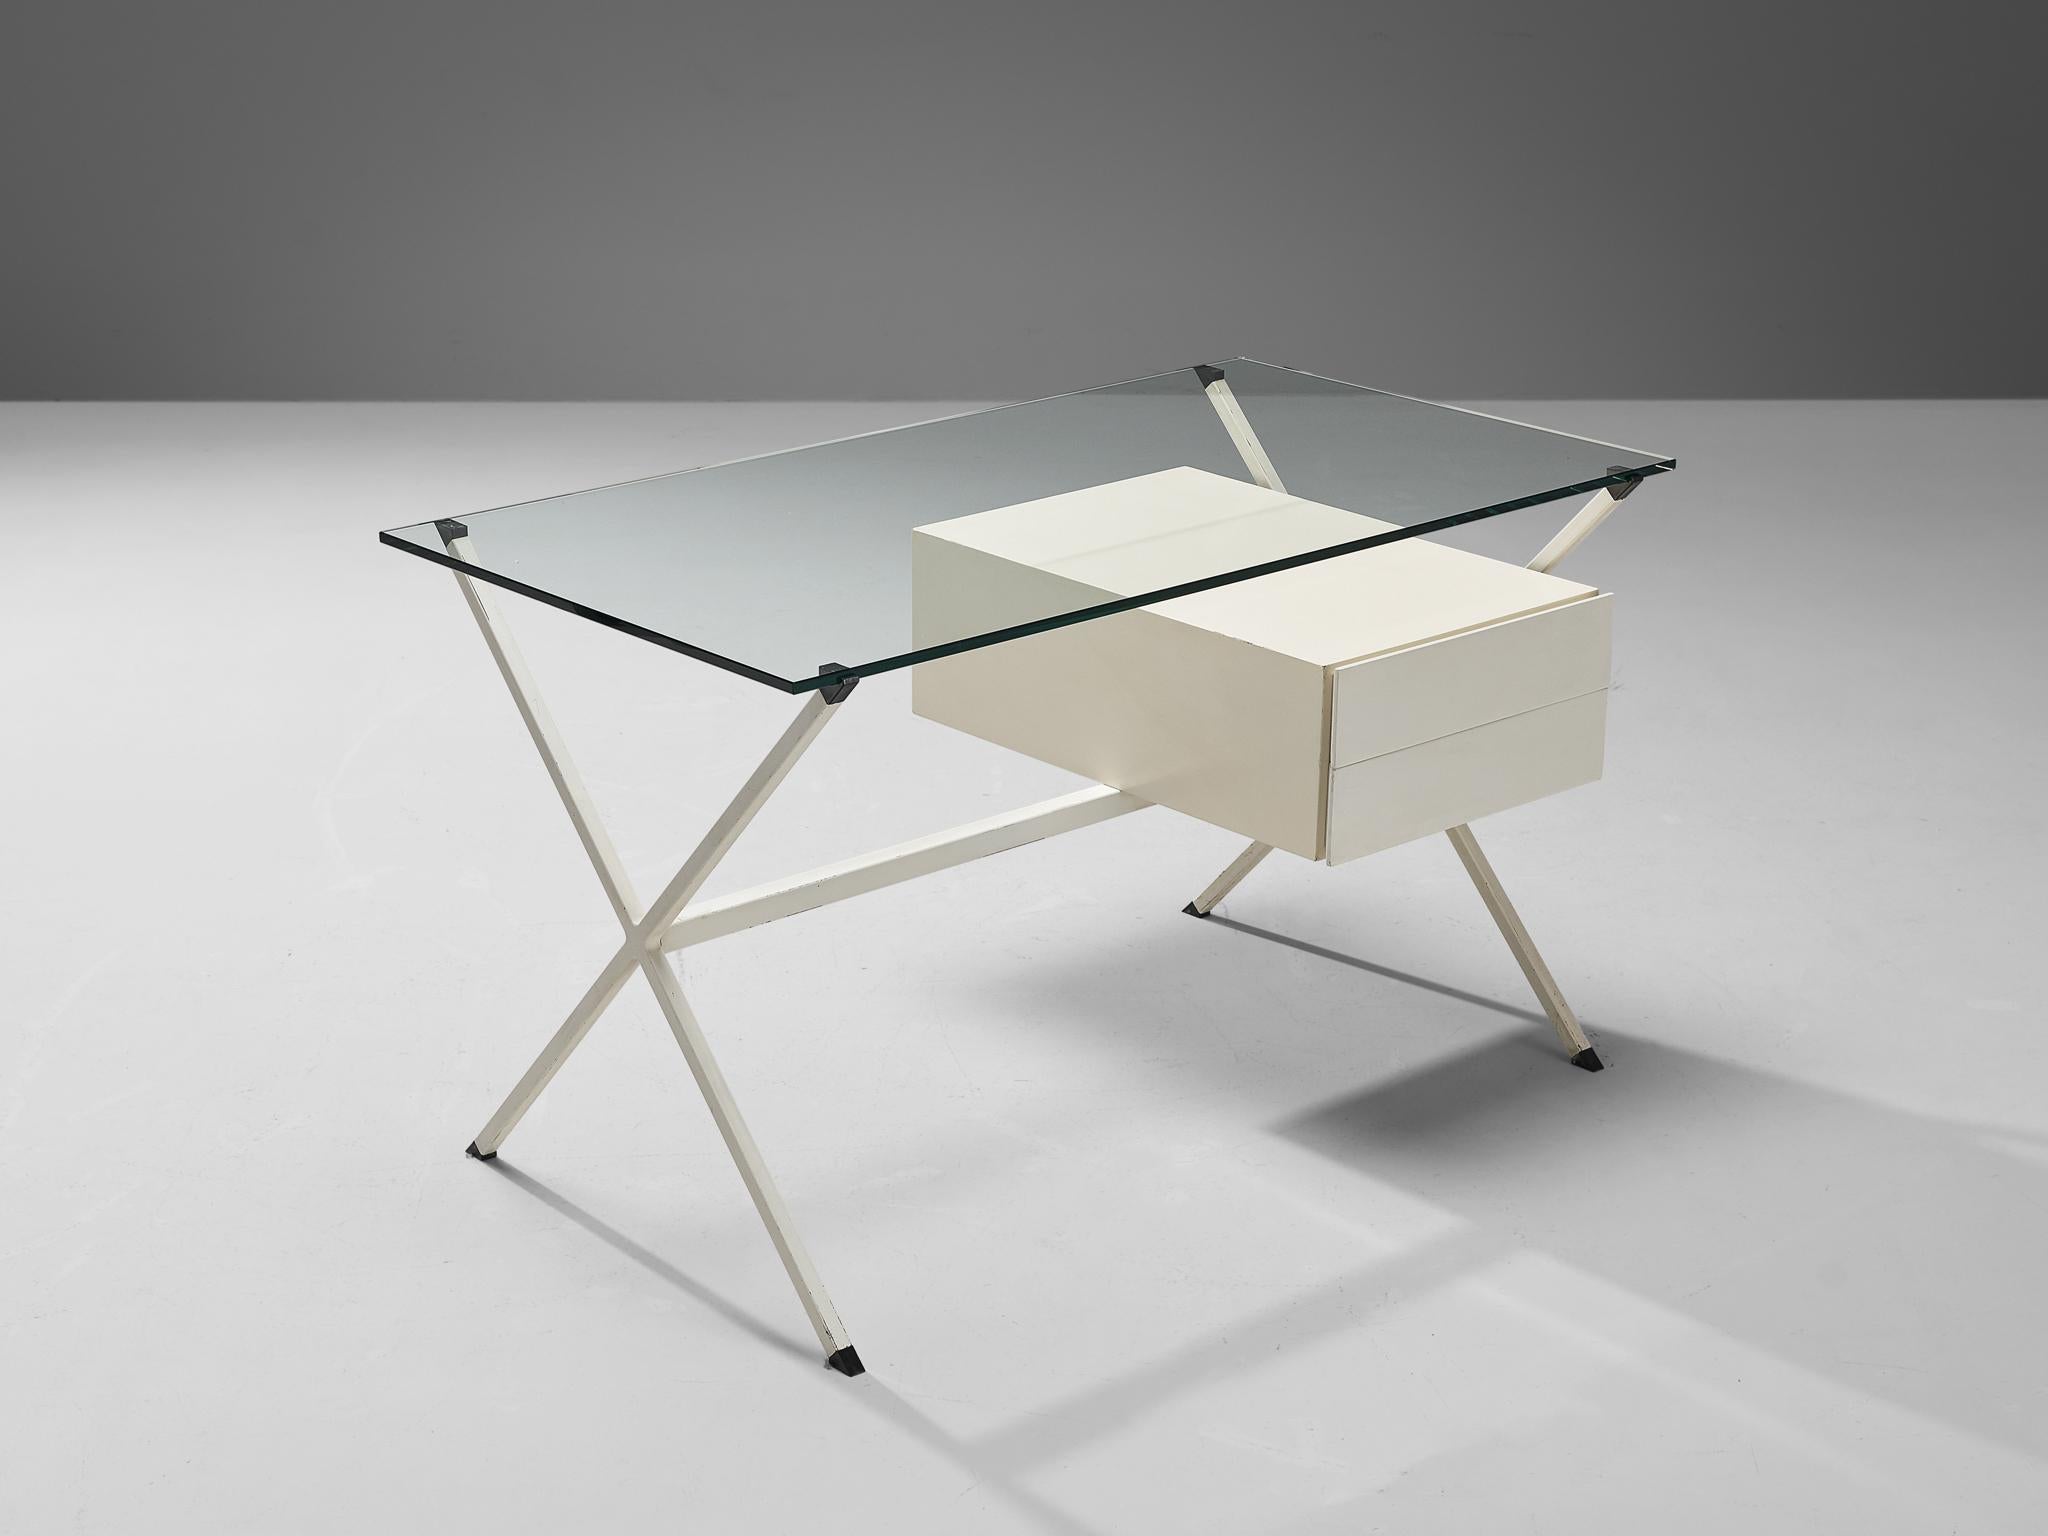 Franco Albini for Knoll, model 80, glass, lacquered wood, lacquered steel, Italy, 1949

Franco Albini’s model 80 desk combines glass, steel and wood which resulted in a minimalistic balance. The desk features Albini’s design philosophy and